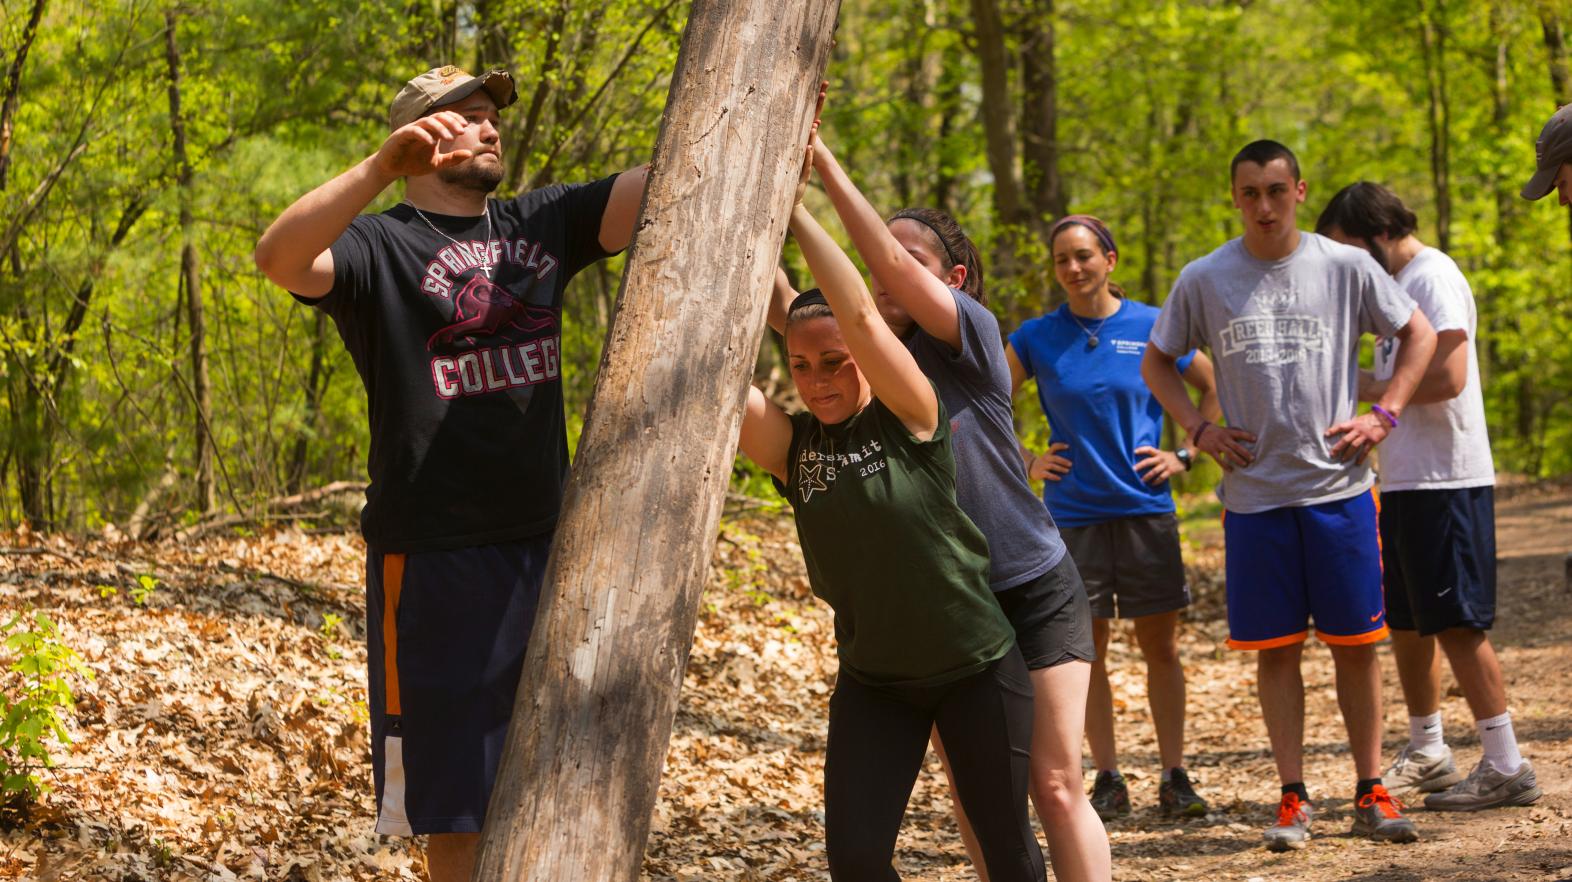 Students work together to lift a log during Outdoor Pursuits at Springfield College